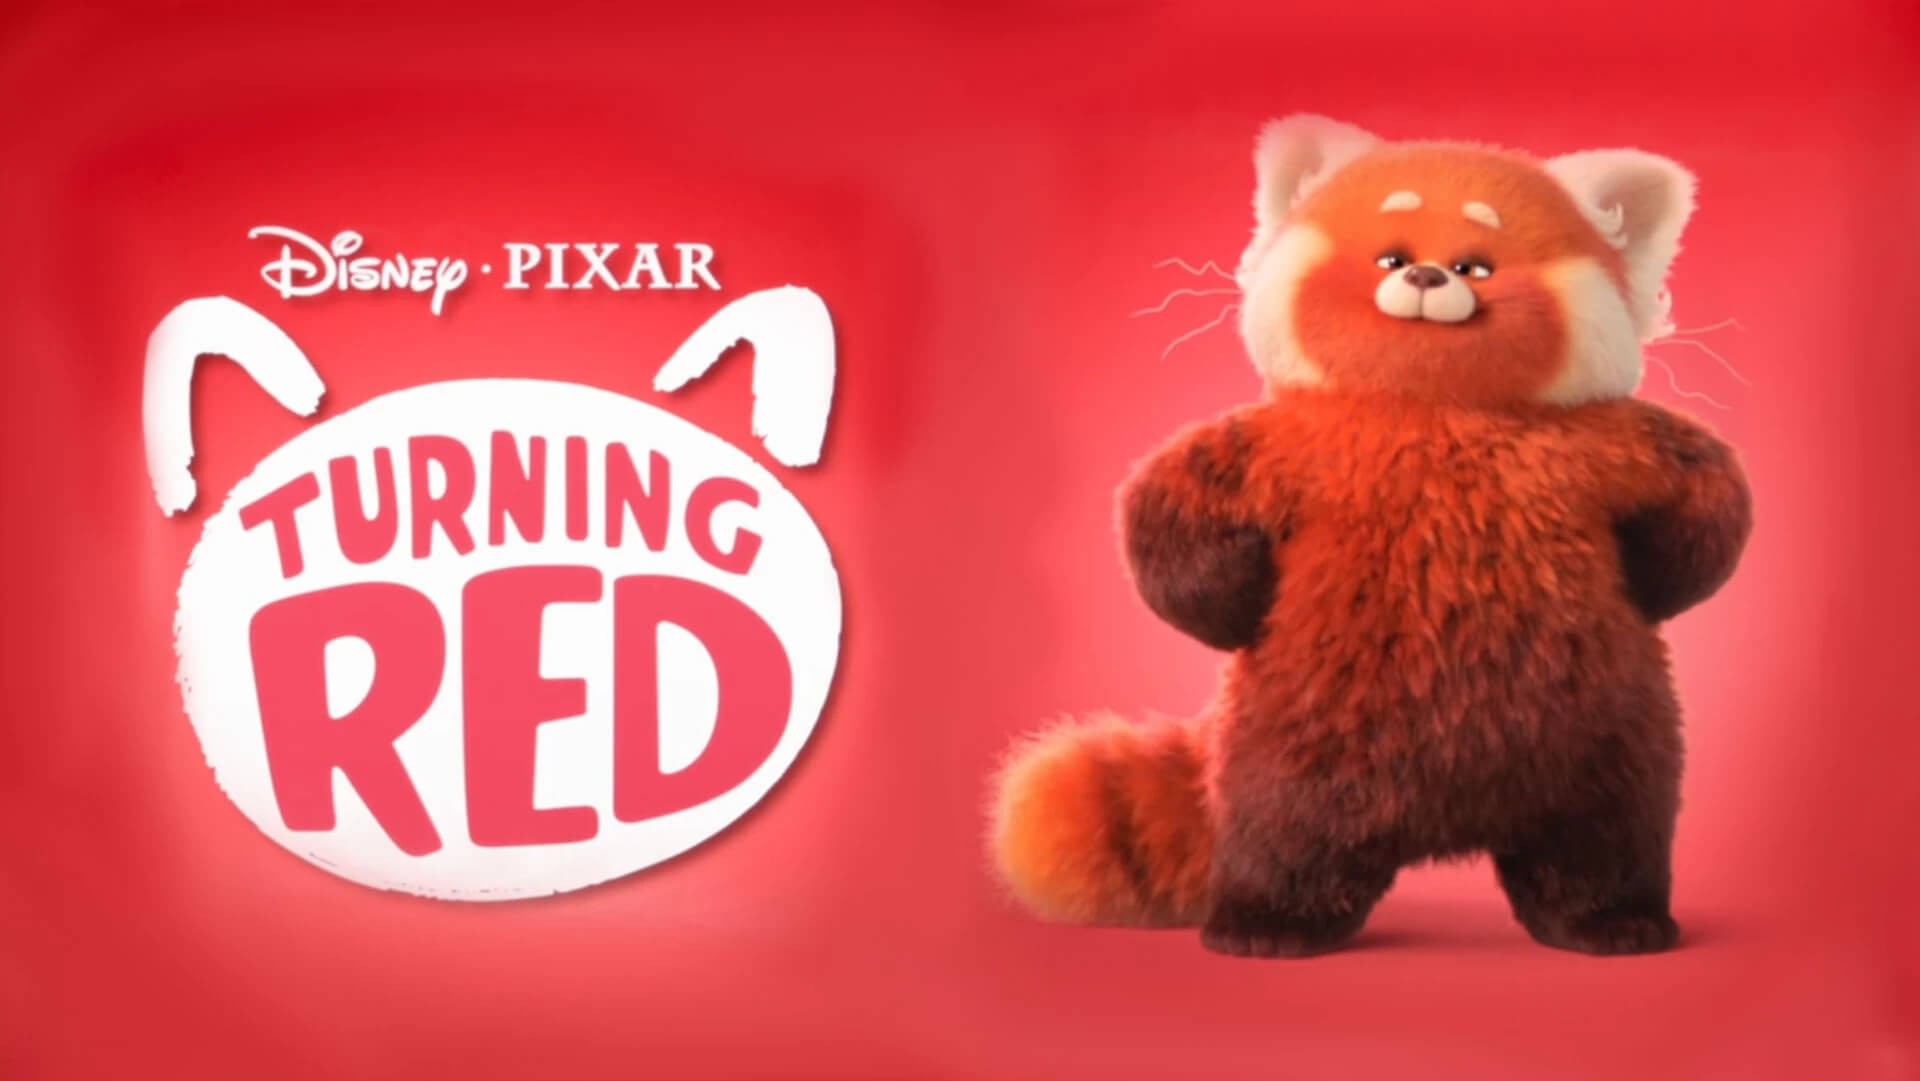 Turning Red' Will See Pixar Return to Theaters - Daily Disney News